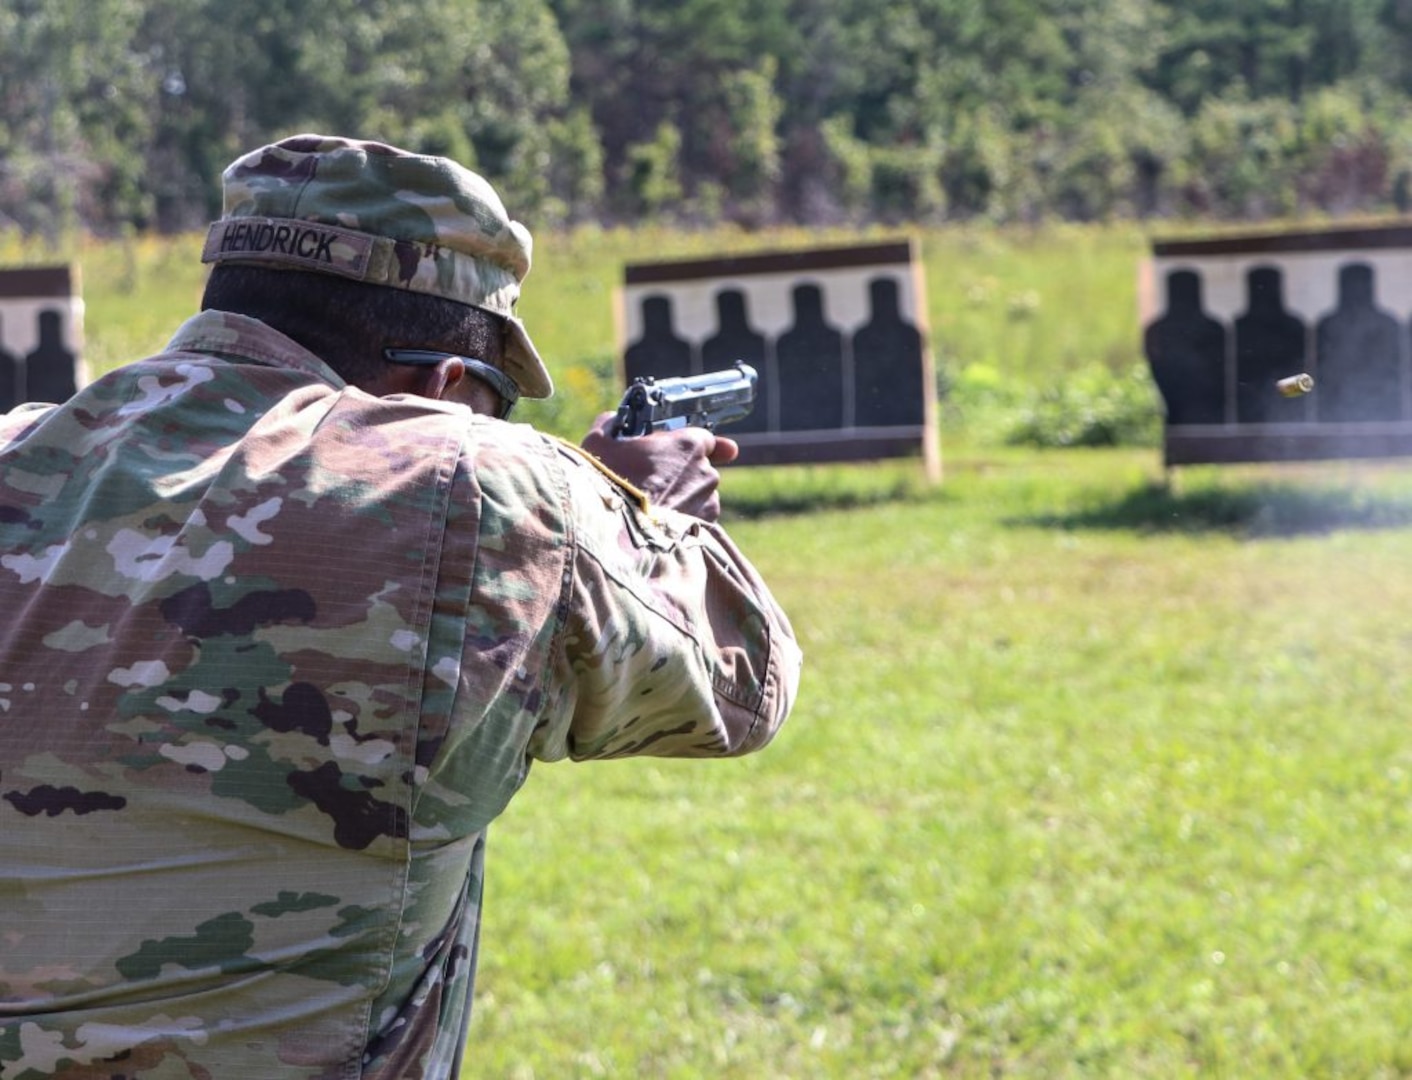 Virginia National Guard Soldiers assigned to the Virginia Beach-based 329th Regional Support Group compete with the M4 pistol during a competition Aug. 19, 2020, at Fort Pickett, Virginia.